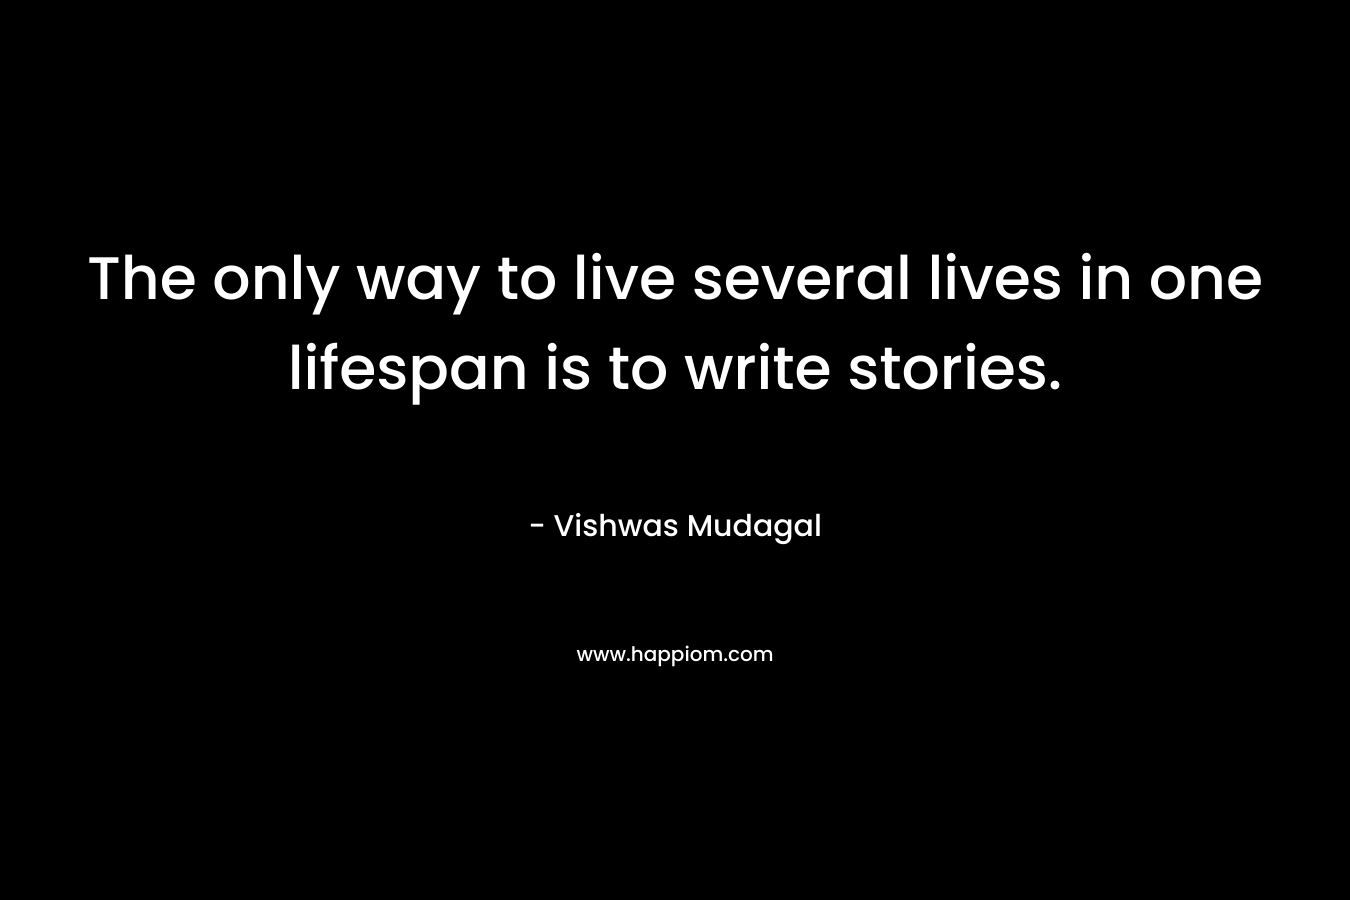 The only way to live several lives in one lifespan is to write stories. – Vishwas Mudagal